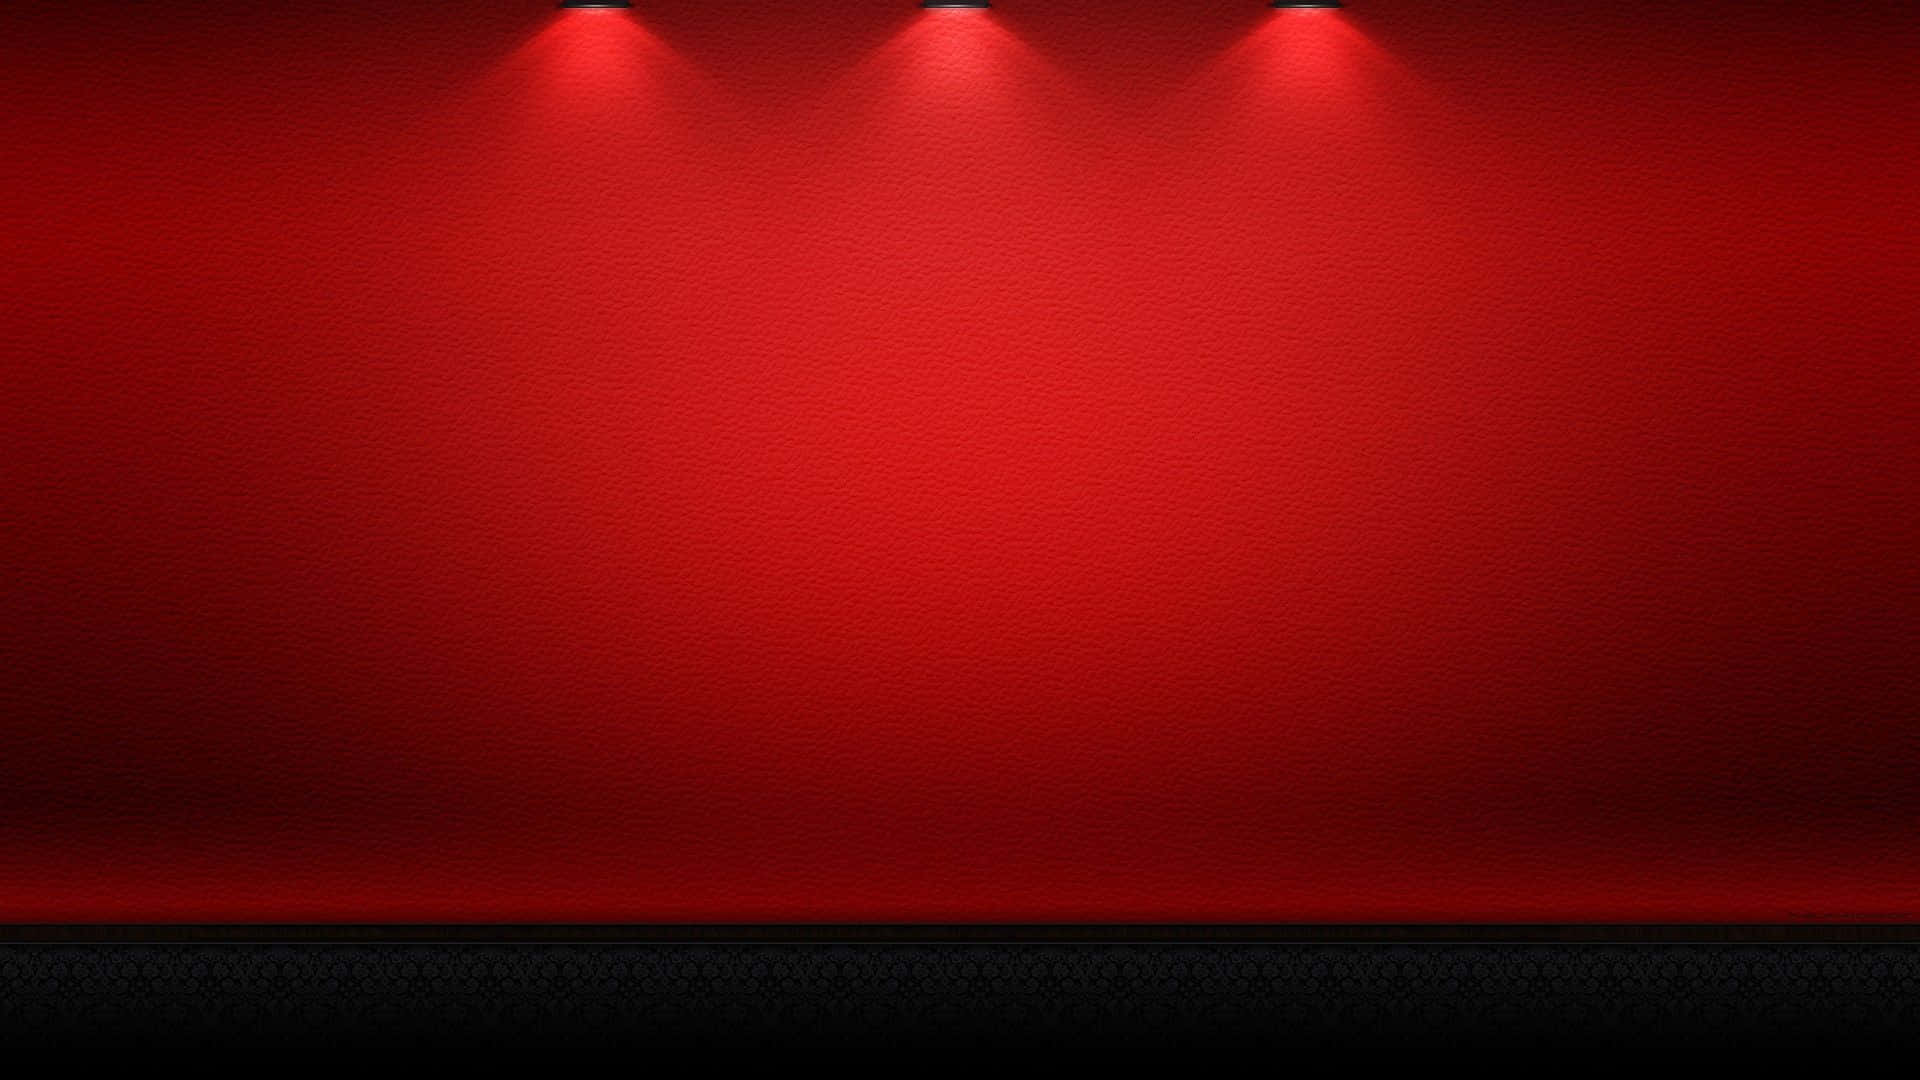 An eye catching and vibrant solid red background